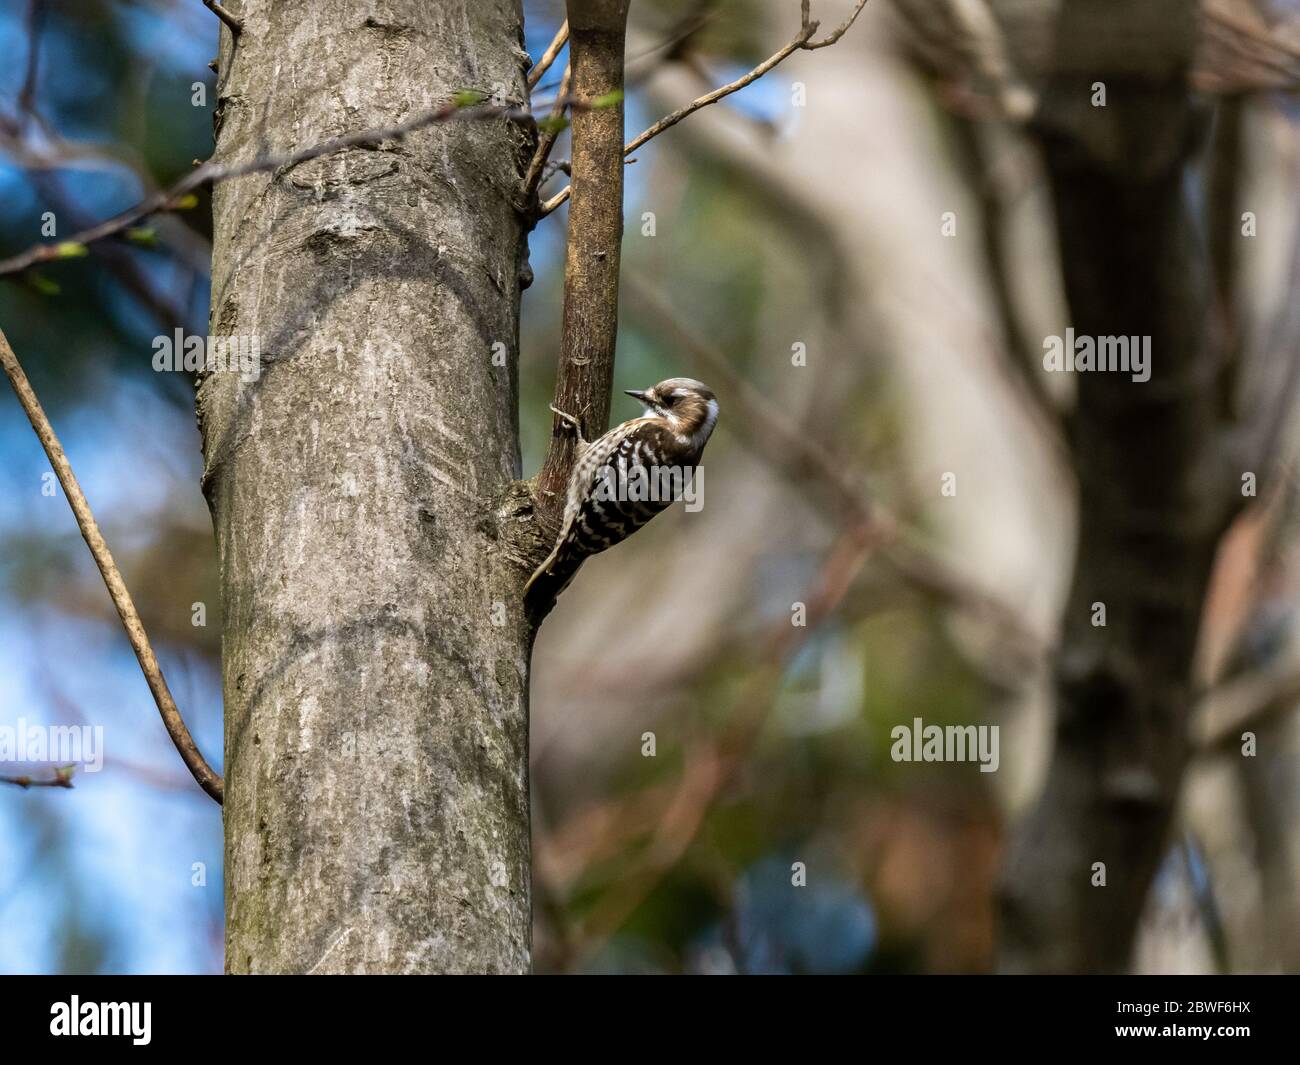 A Japanese pygmy woodpecker, Yungipicus kizuki, perches on the trunk on a small tree trunk in a forest near Yokohama, Japan. Stock Photo